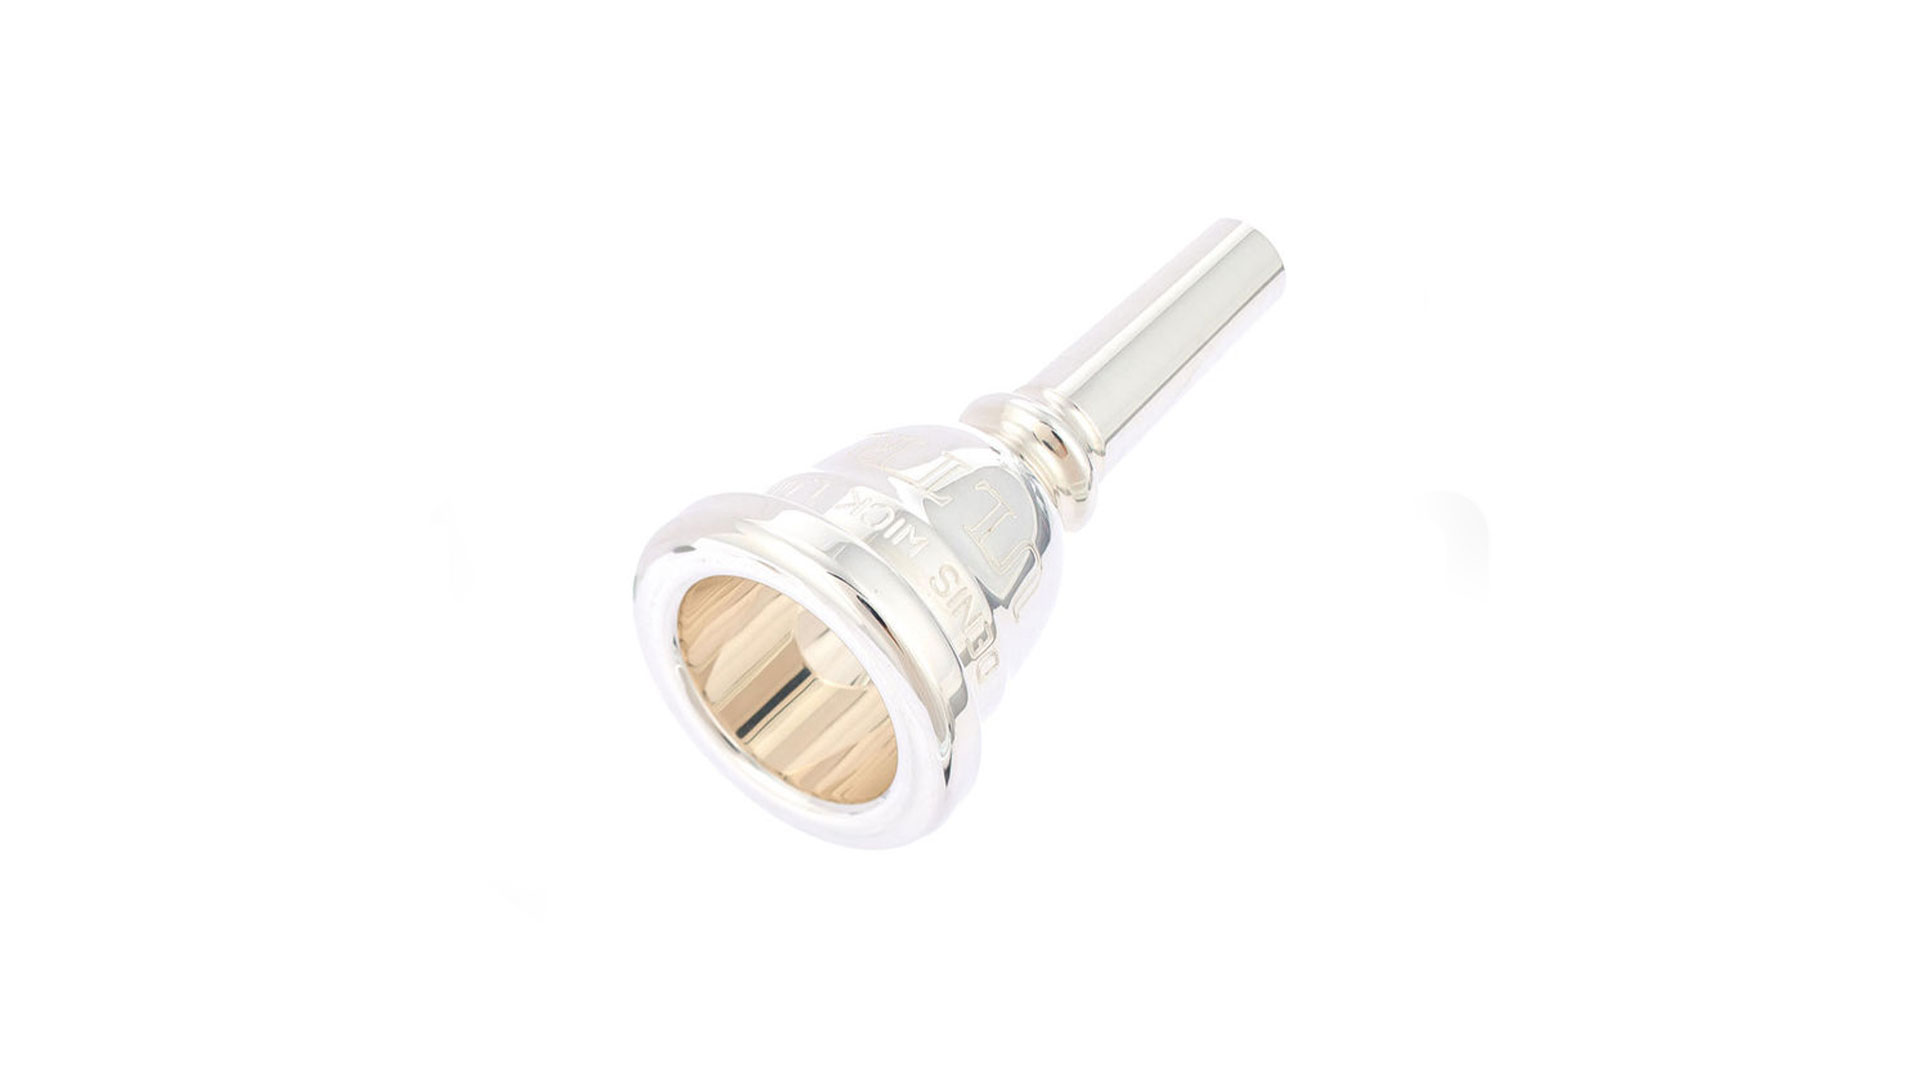 Top Mouthpieces for Euphonium with M-Shaft